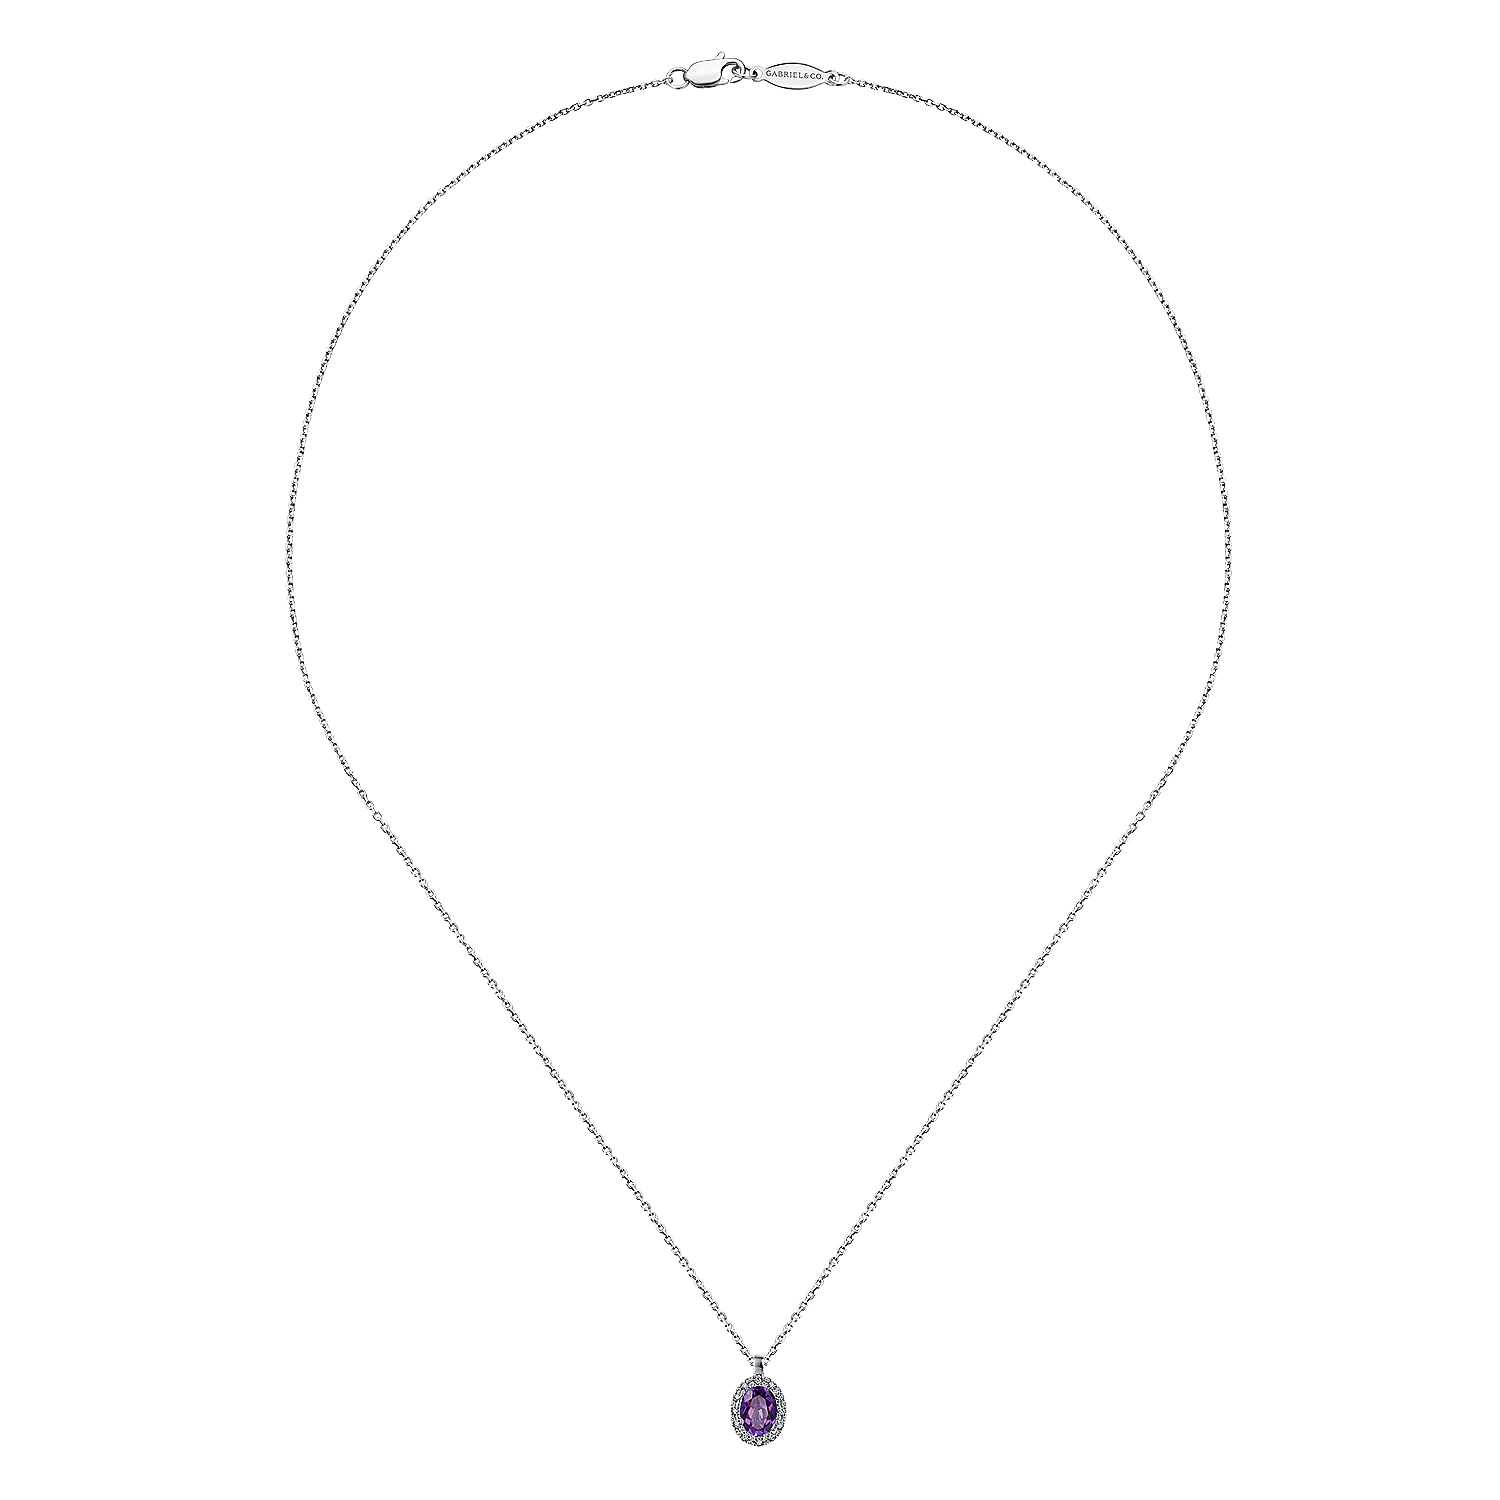 18 inch 14K White Gold Oval Amethyst and Diamond Halo Pendant Necklace